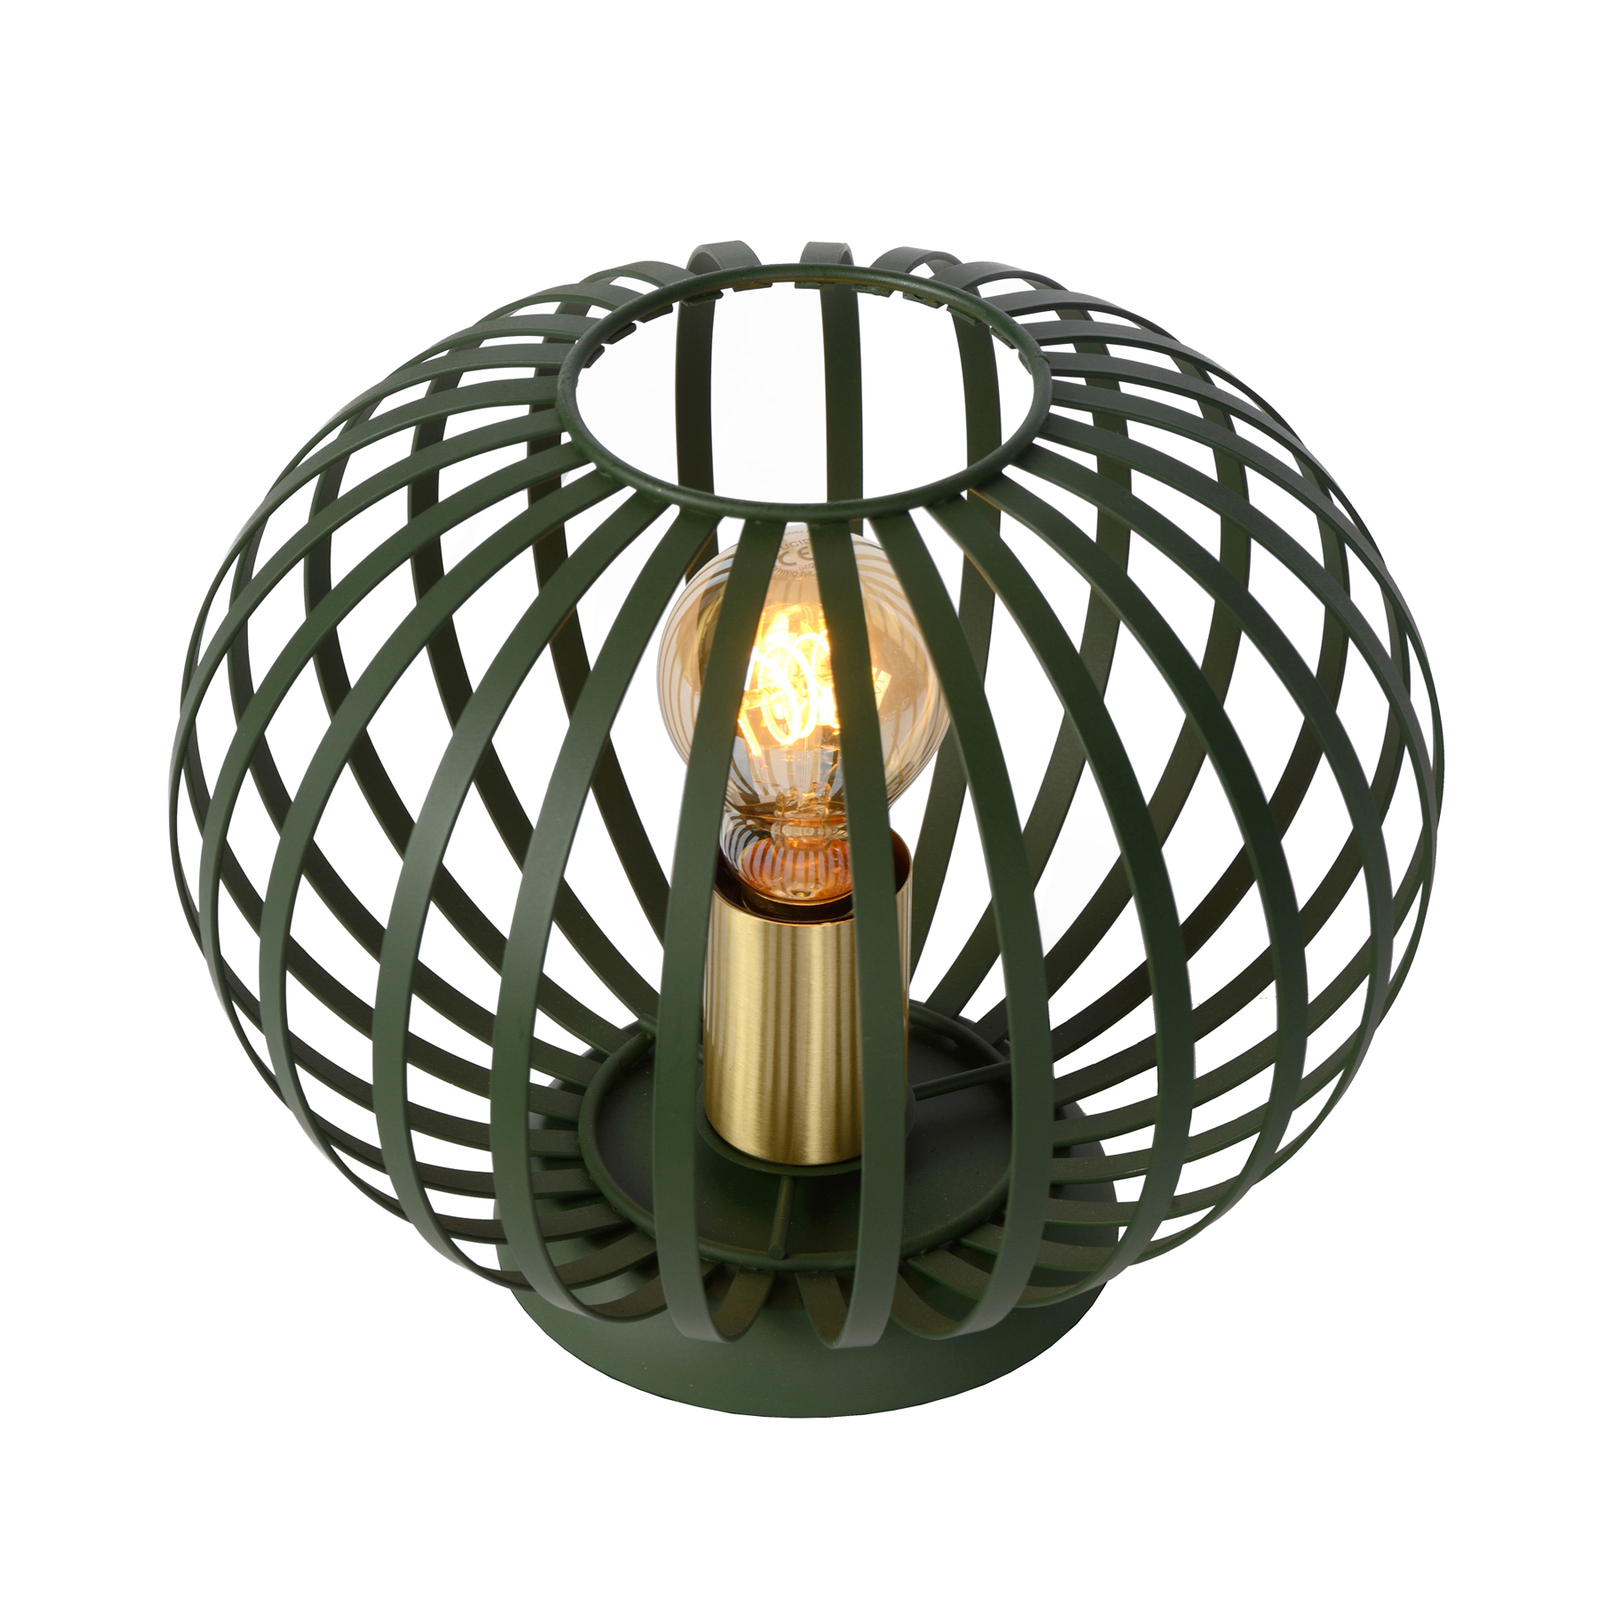 Manuela table lamp cage lampshade, green/gold